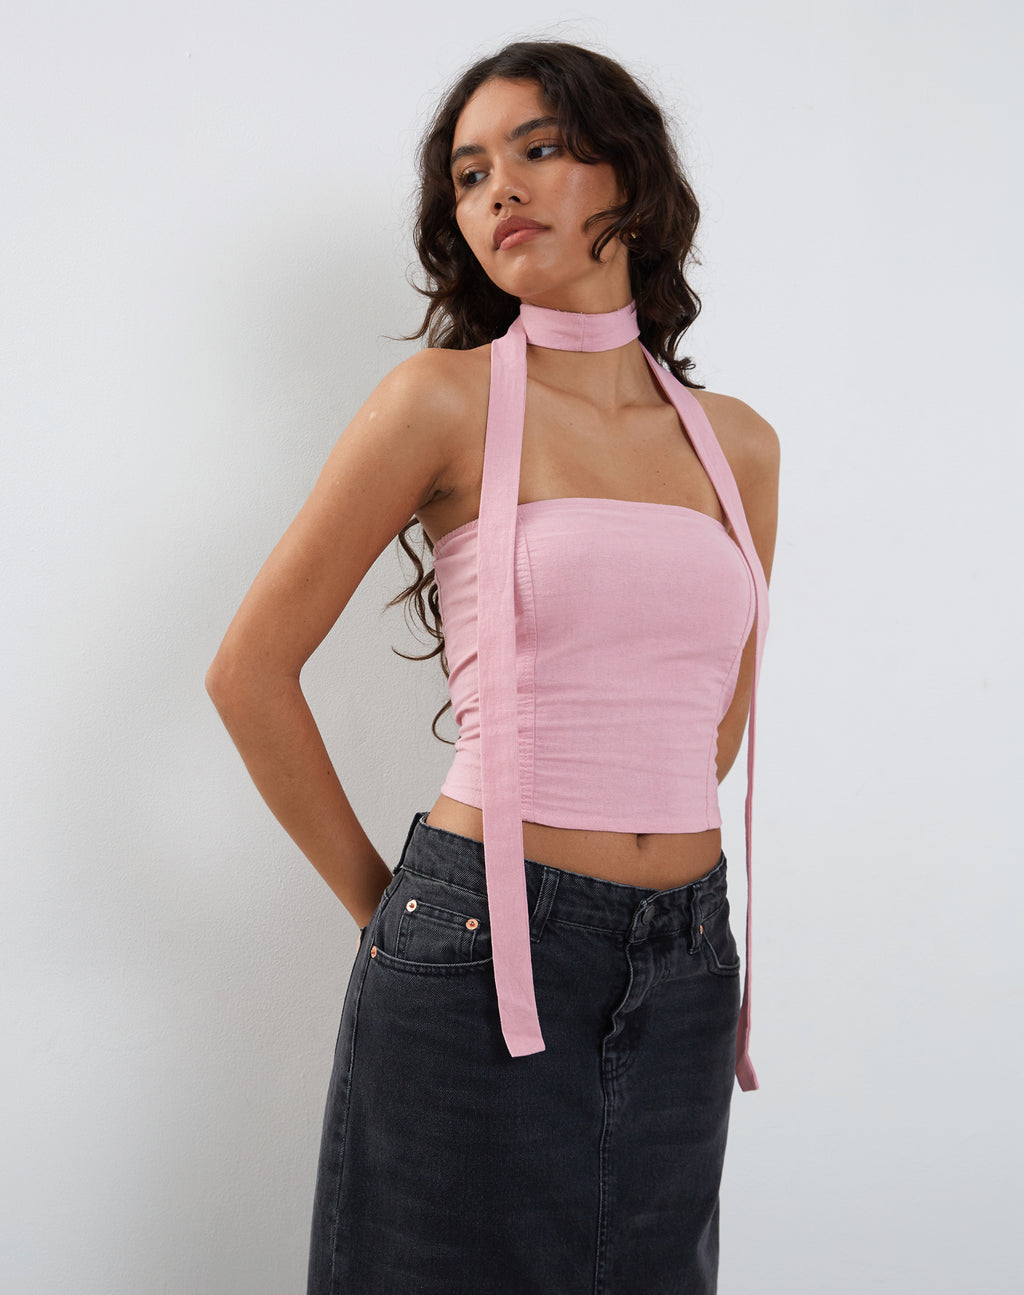 Shaloe Bandeau Top and Scarf Set in Flamingo Pink